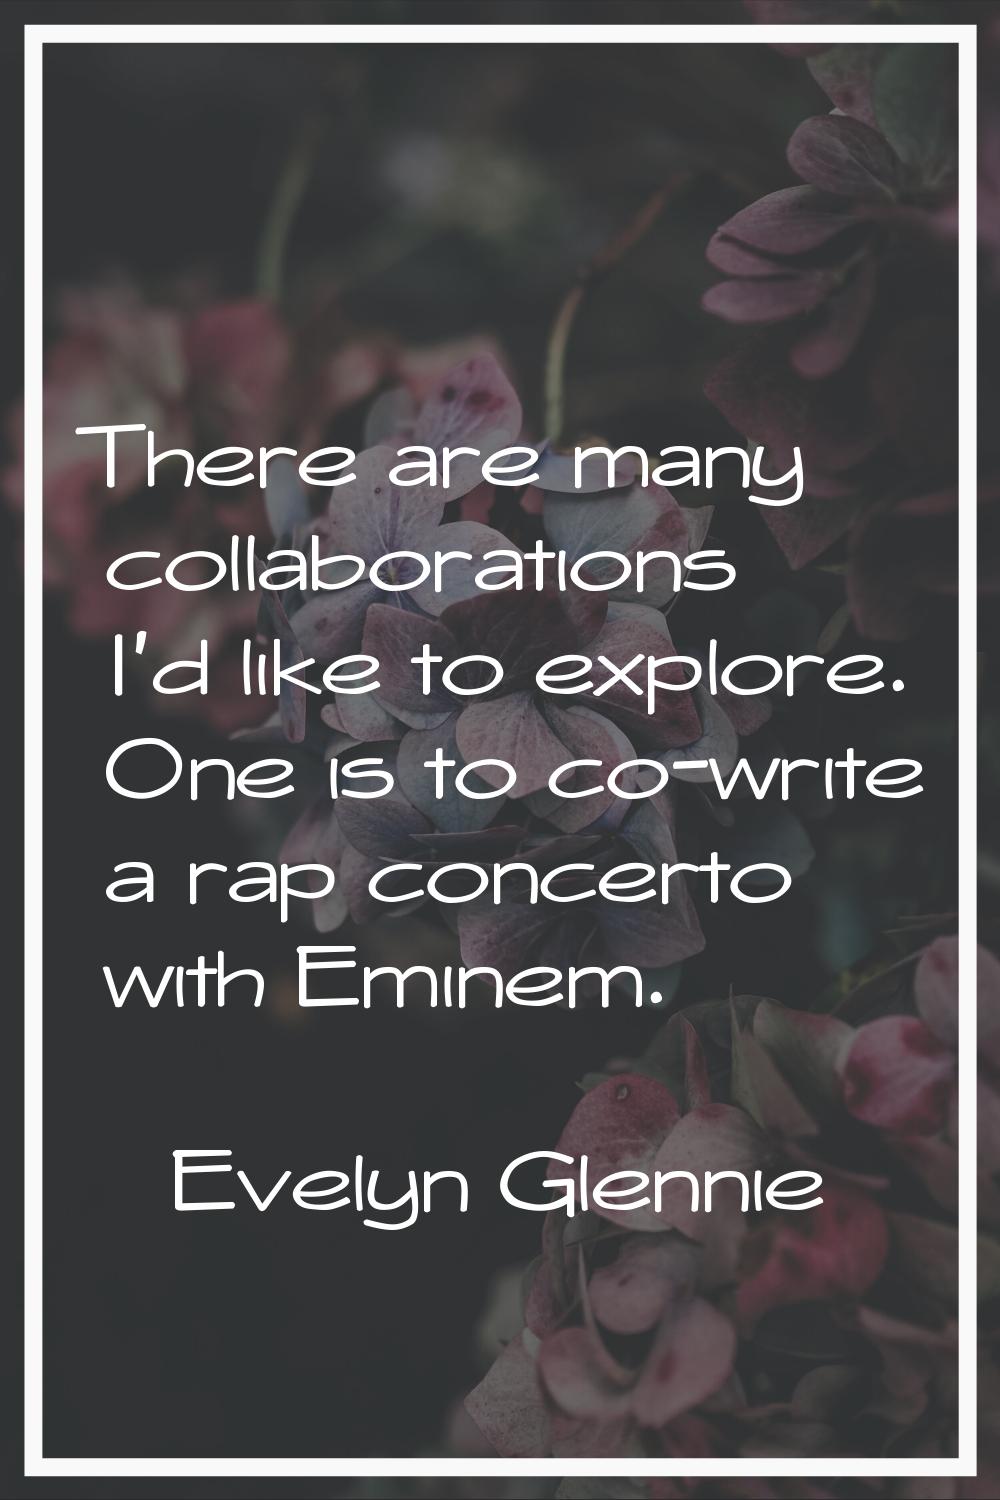 There are many collaborations I'd like to explore. One is to co-write a rap concerto with Eminem.